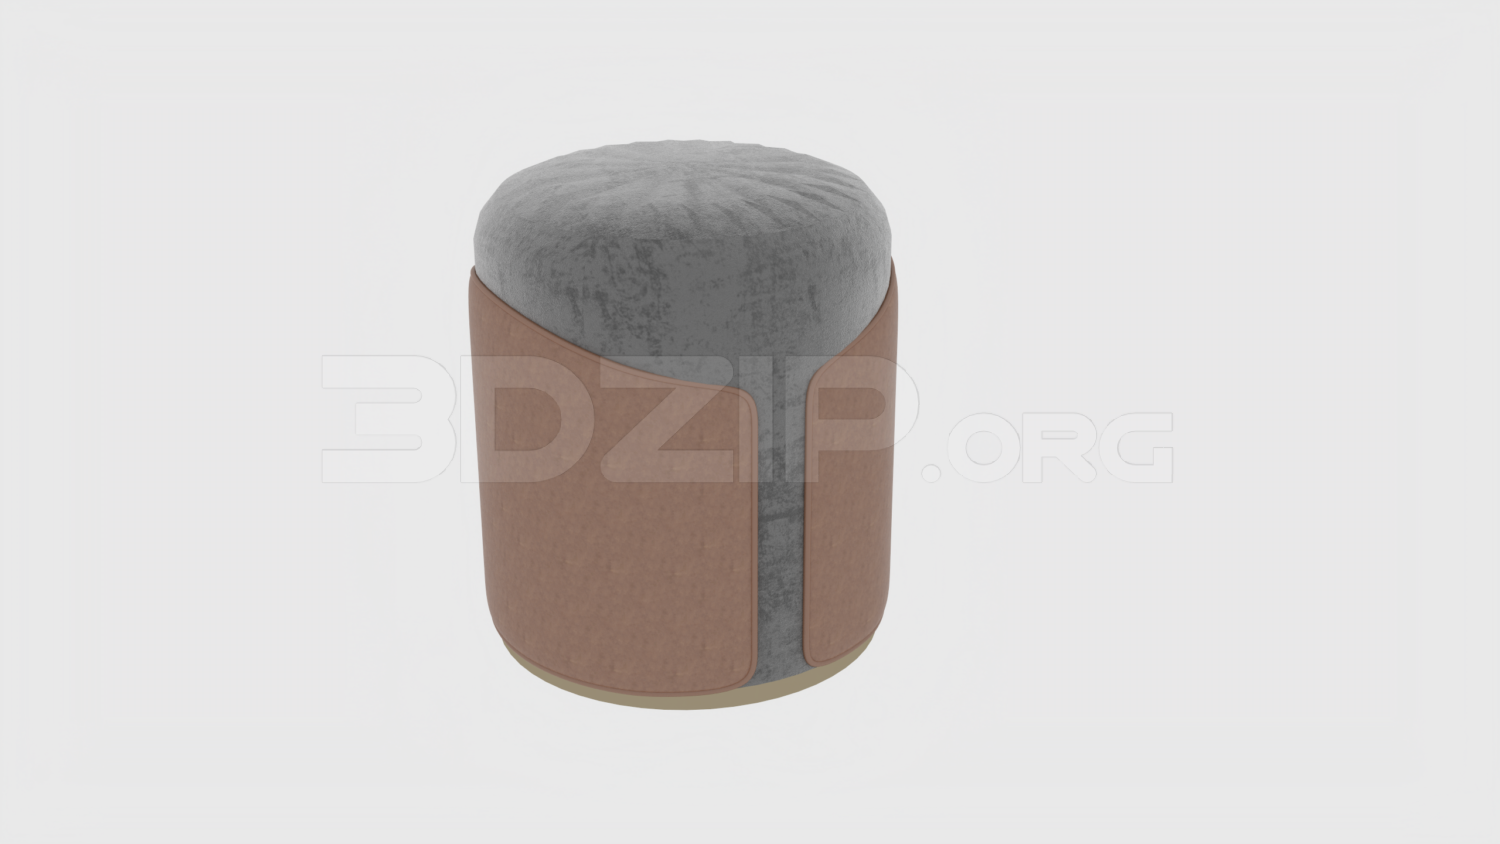 2913. Free 3D Chair Model Download